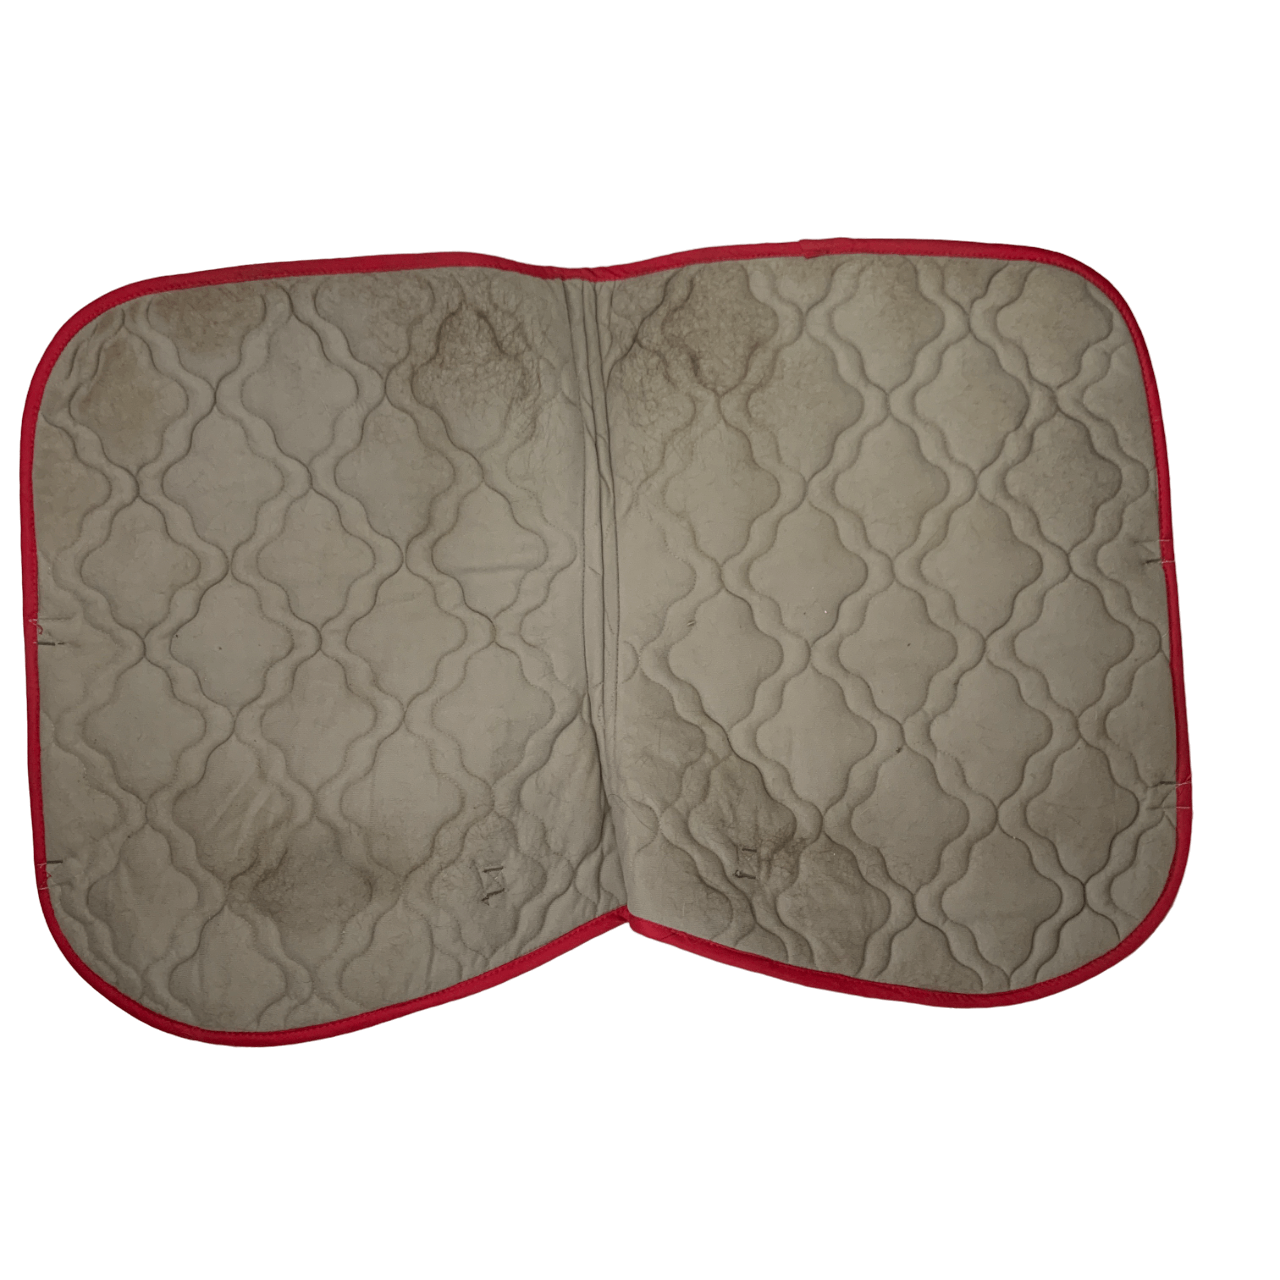 Roma 'Wick Easy' Quilted Dressage Saddle Pad in Brown - Full